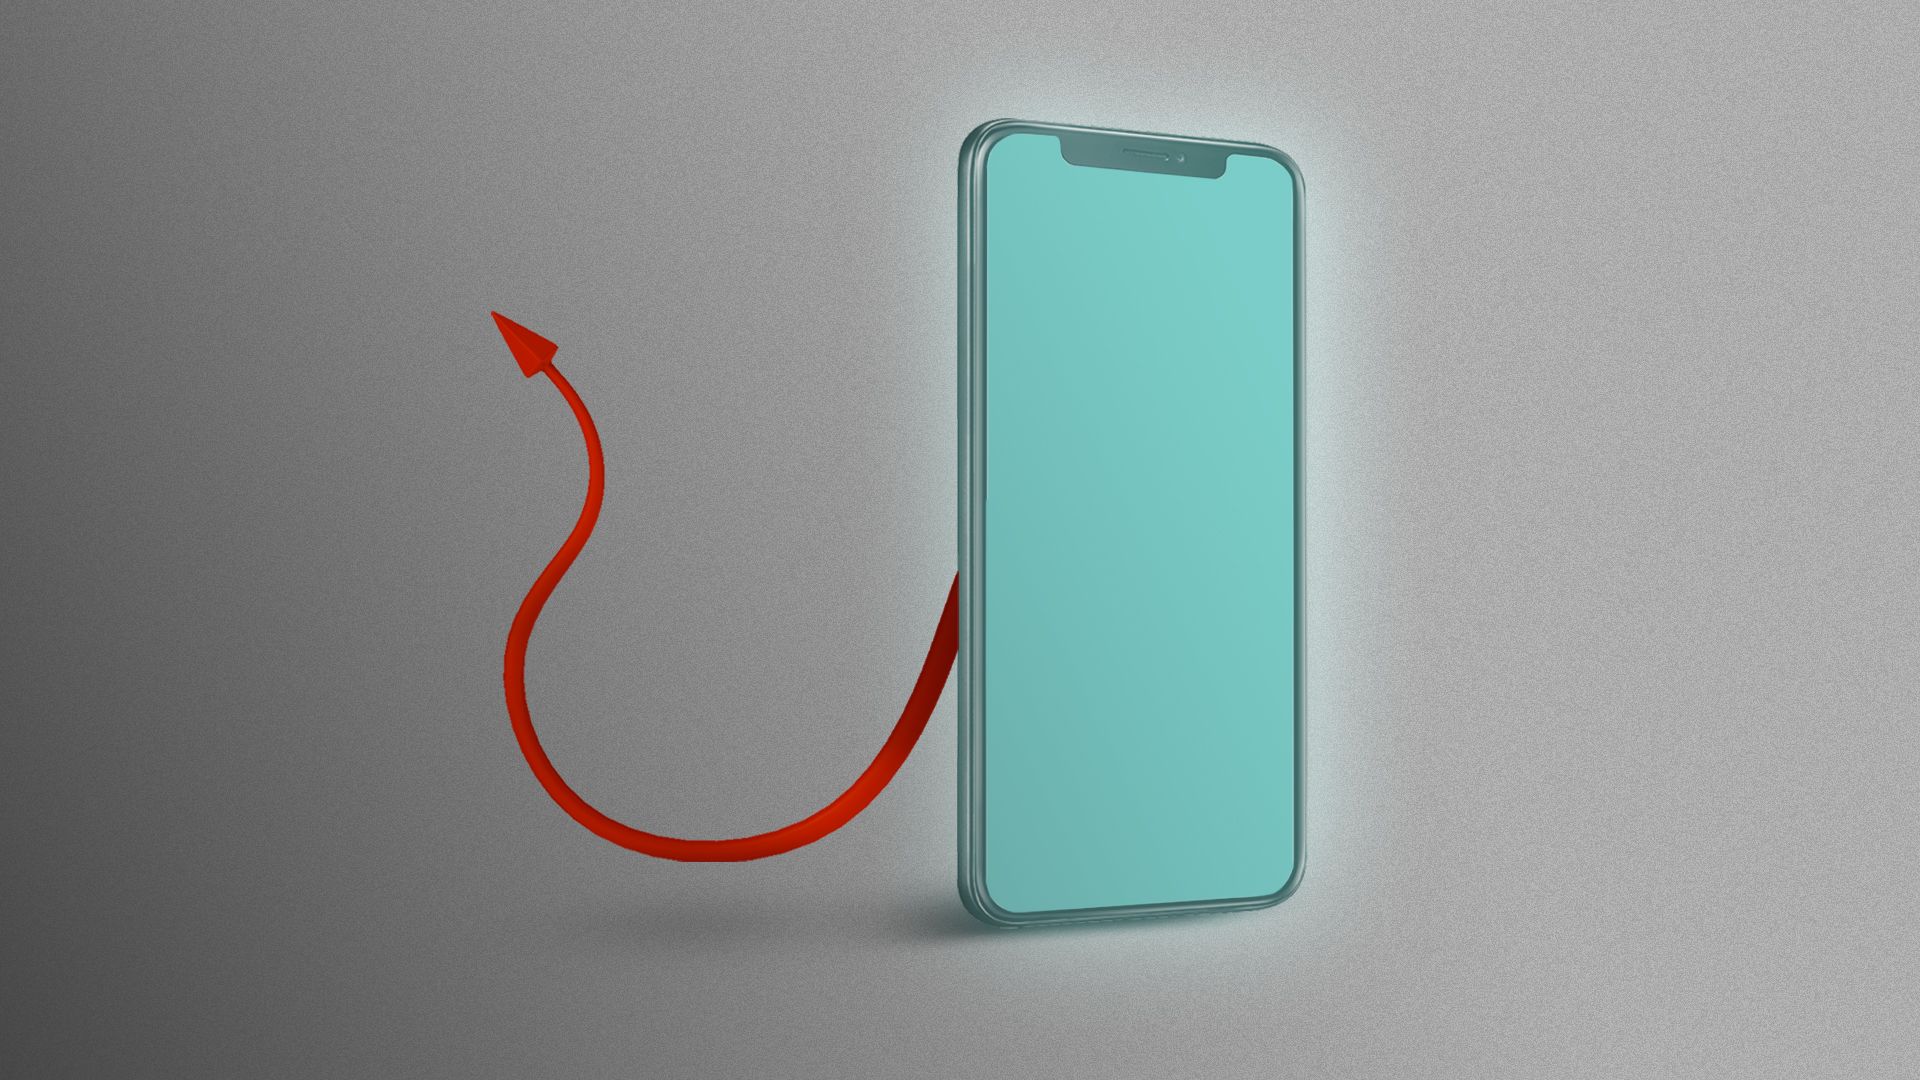 Illustration of a mobile phone turned to the side glowing, a devil's tail is coming out of the back hidden in the shadows. 